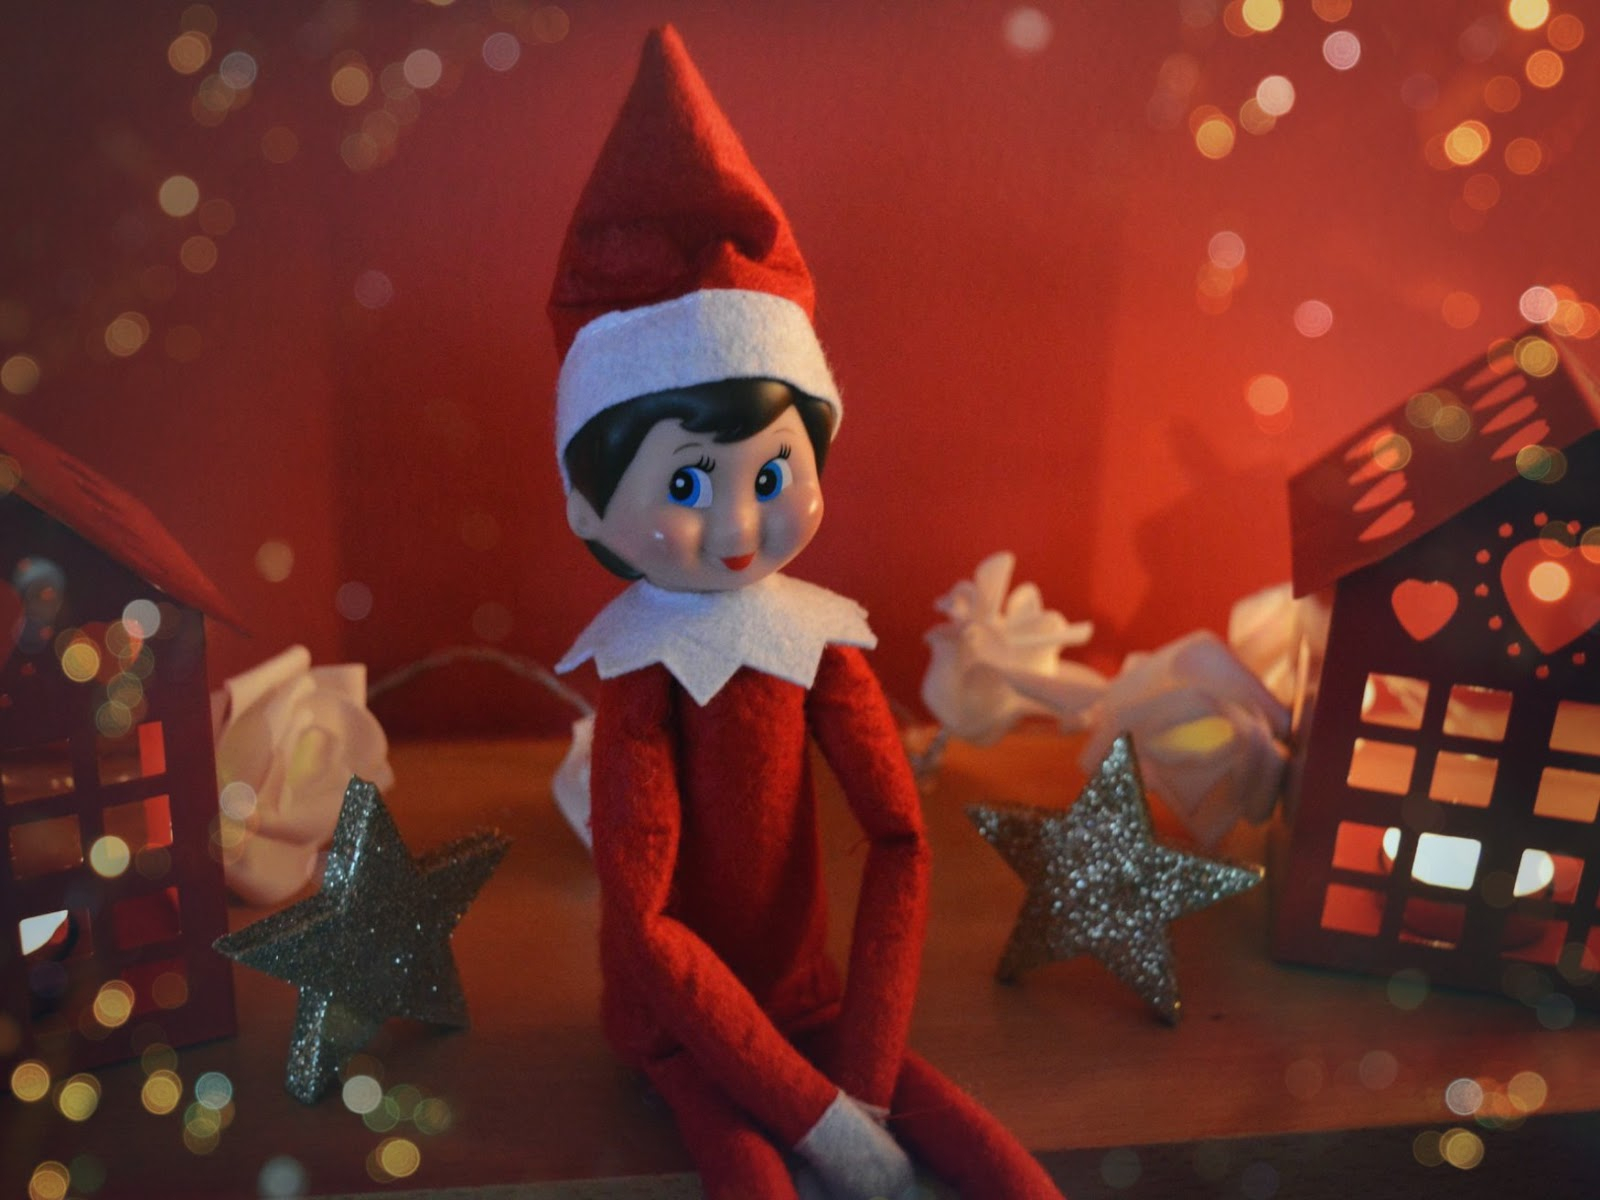 10 Finest And Latest Elf On The Shelf Wallpaper for Desktop with FULL HD 10...